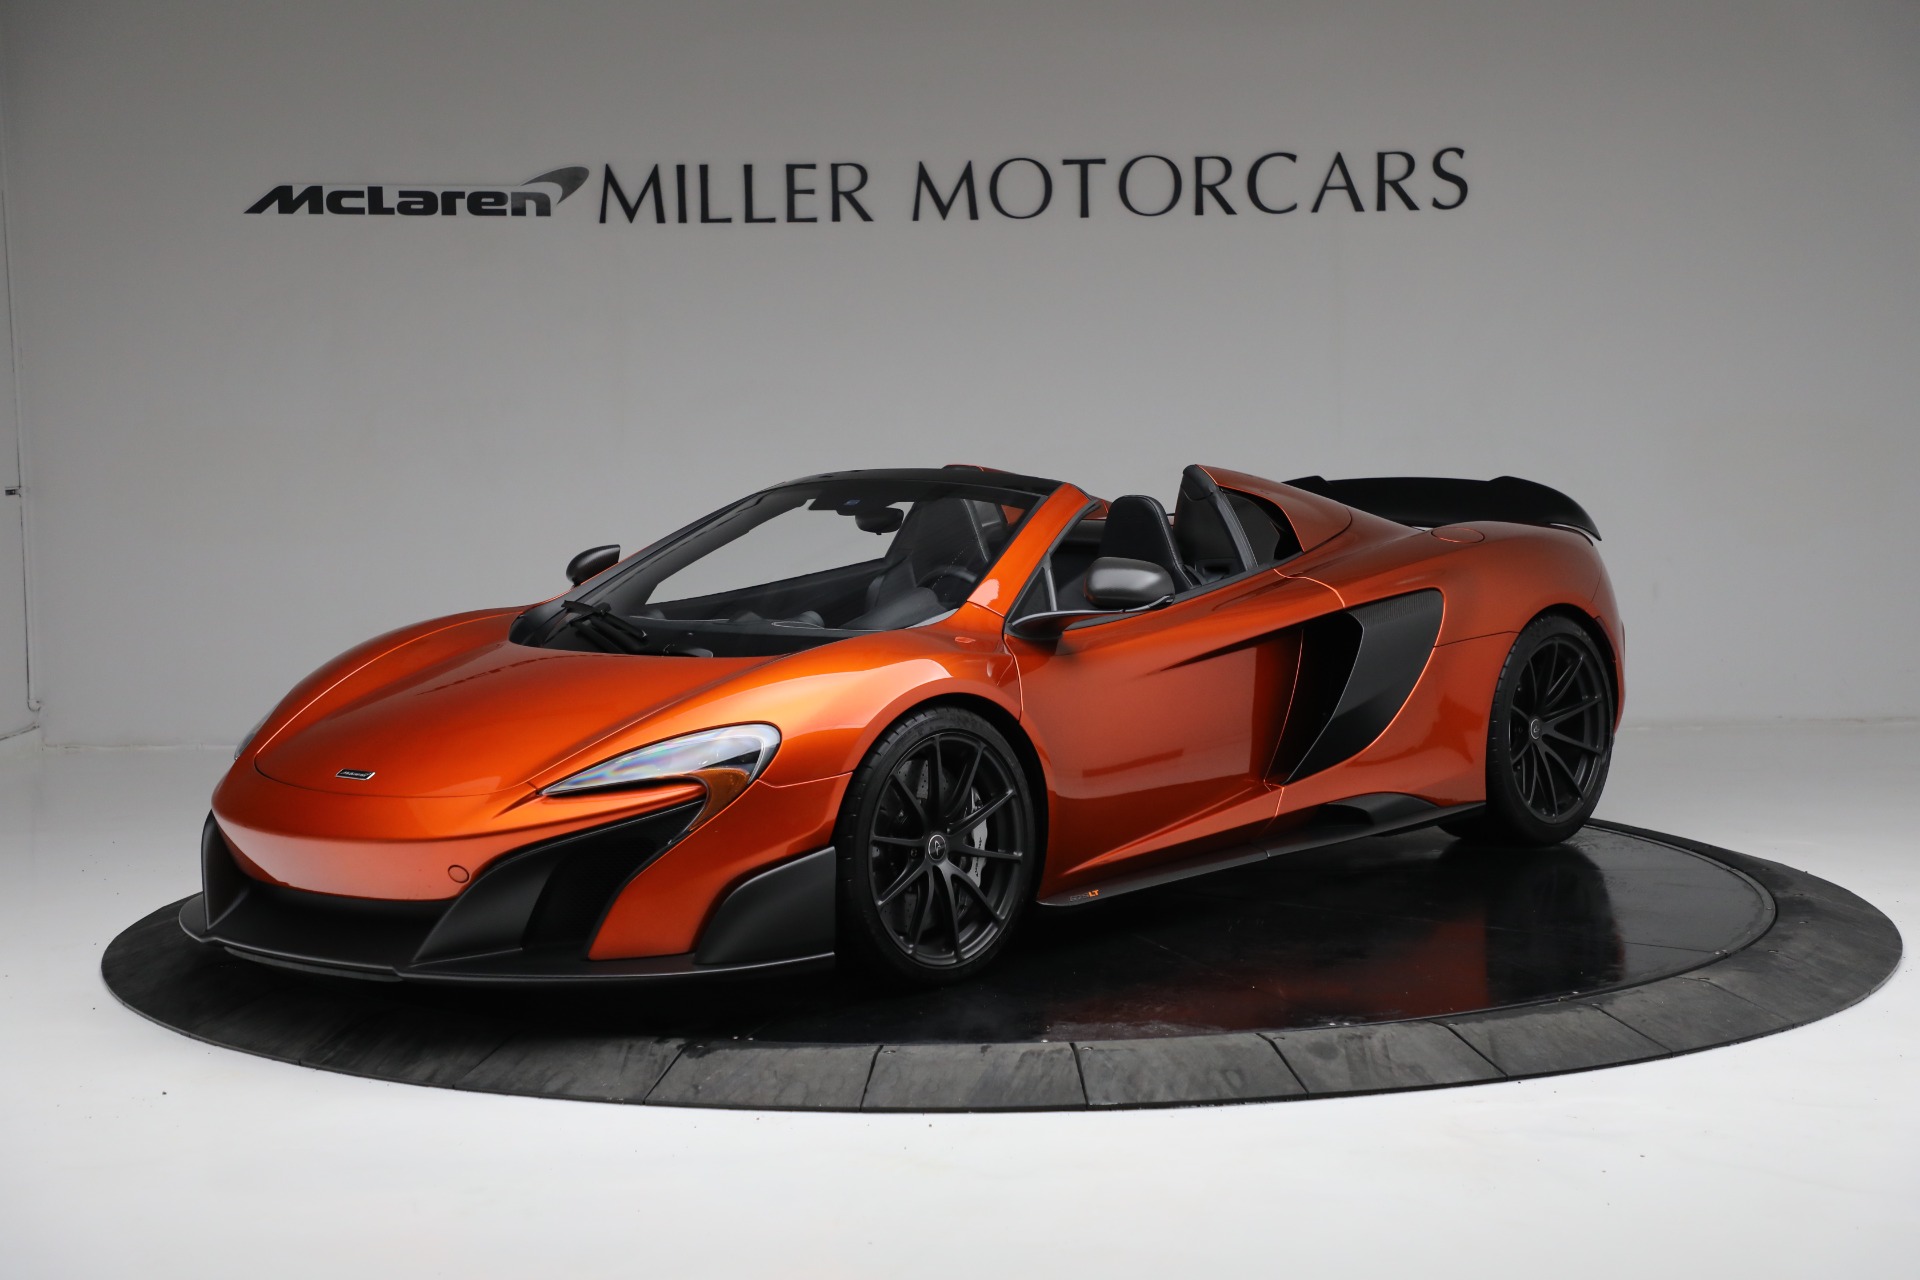 Used 2016 McLaren 675LT Spider for sale $335,900 at Aston Martin of Greenwich in Greenwich CT 06830 1